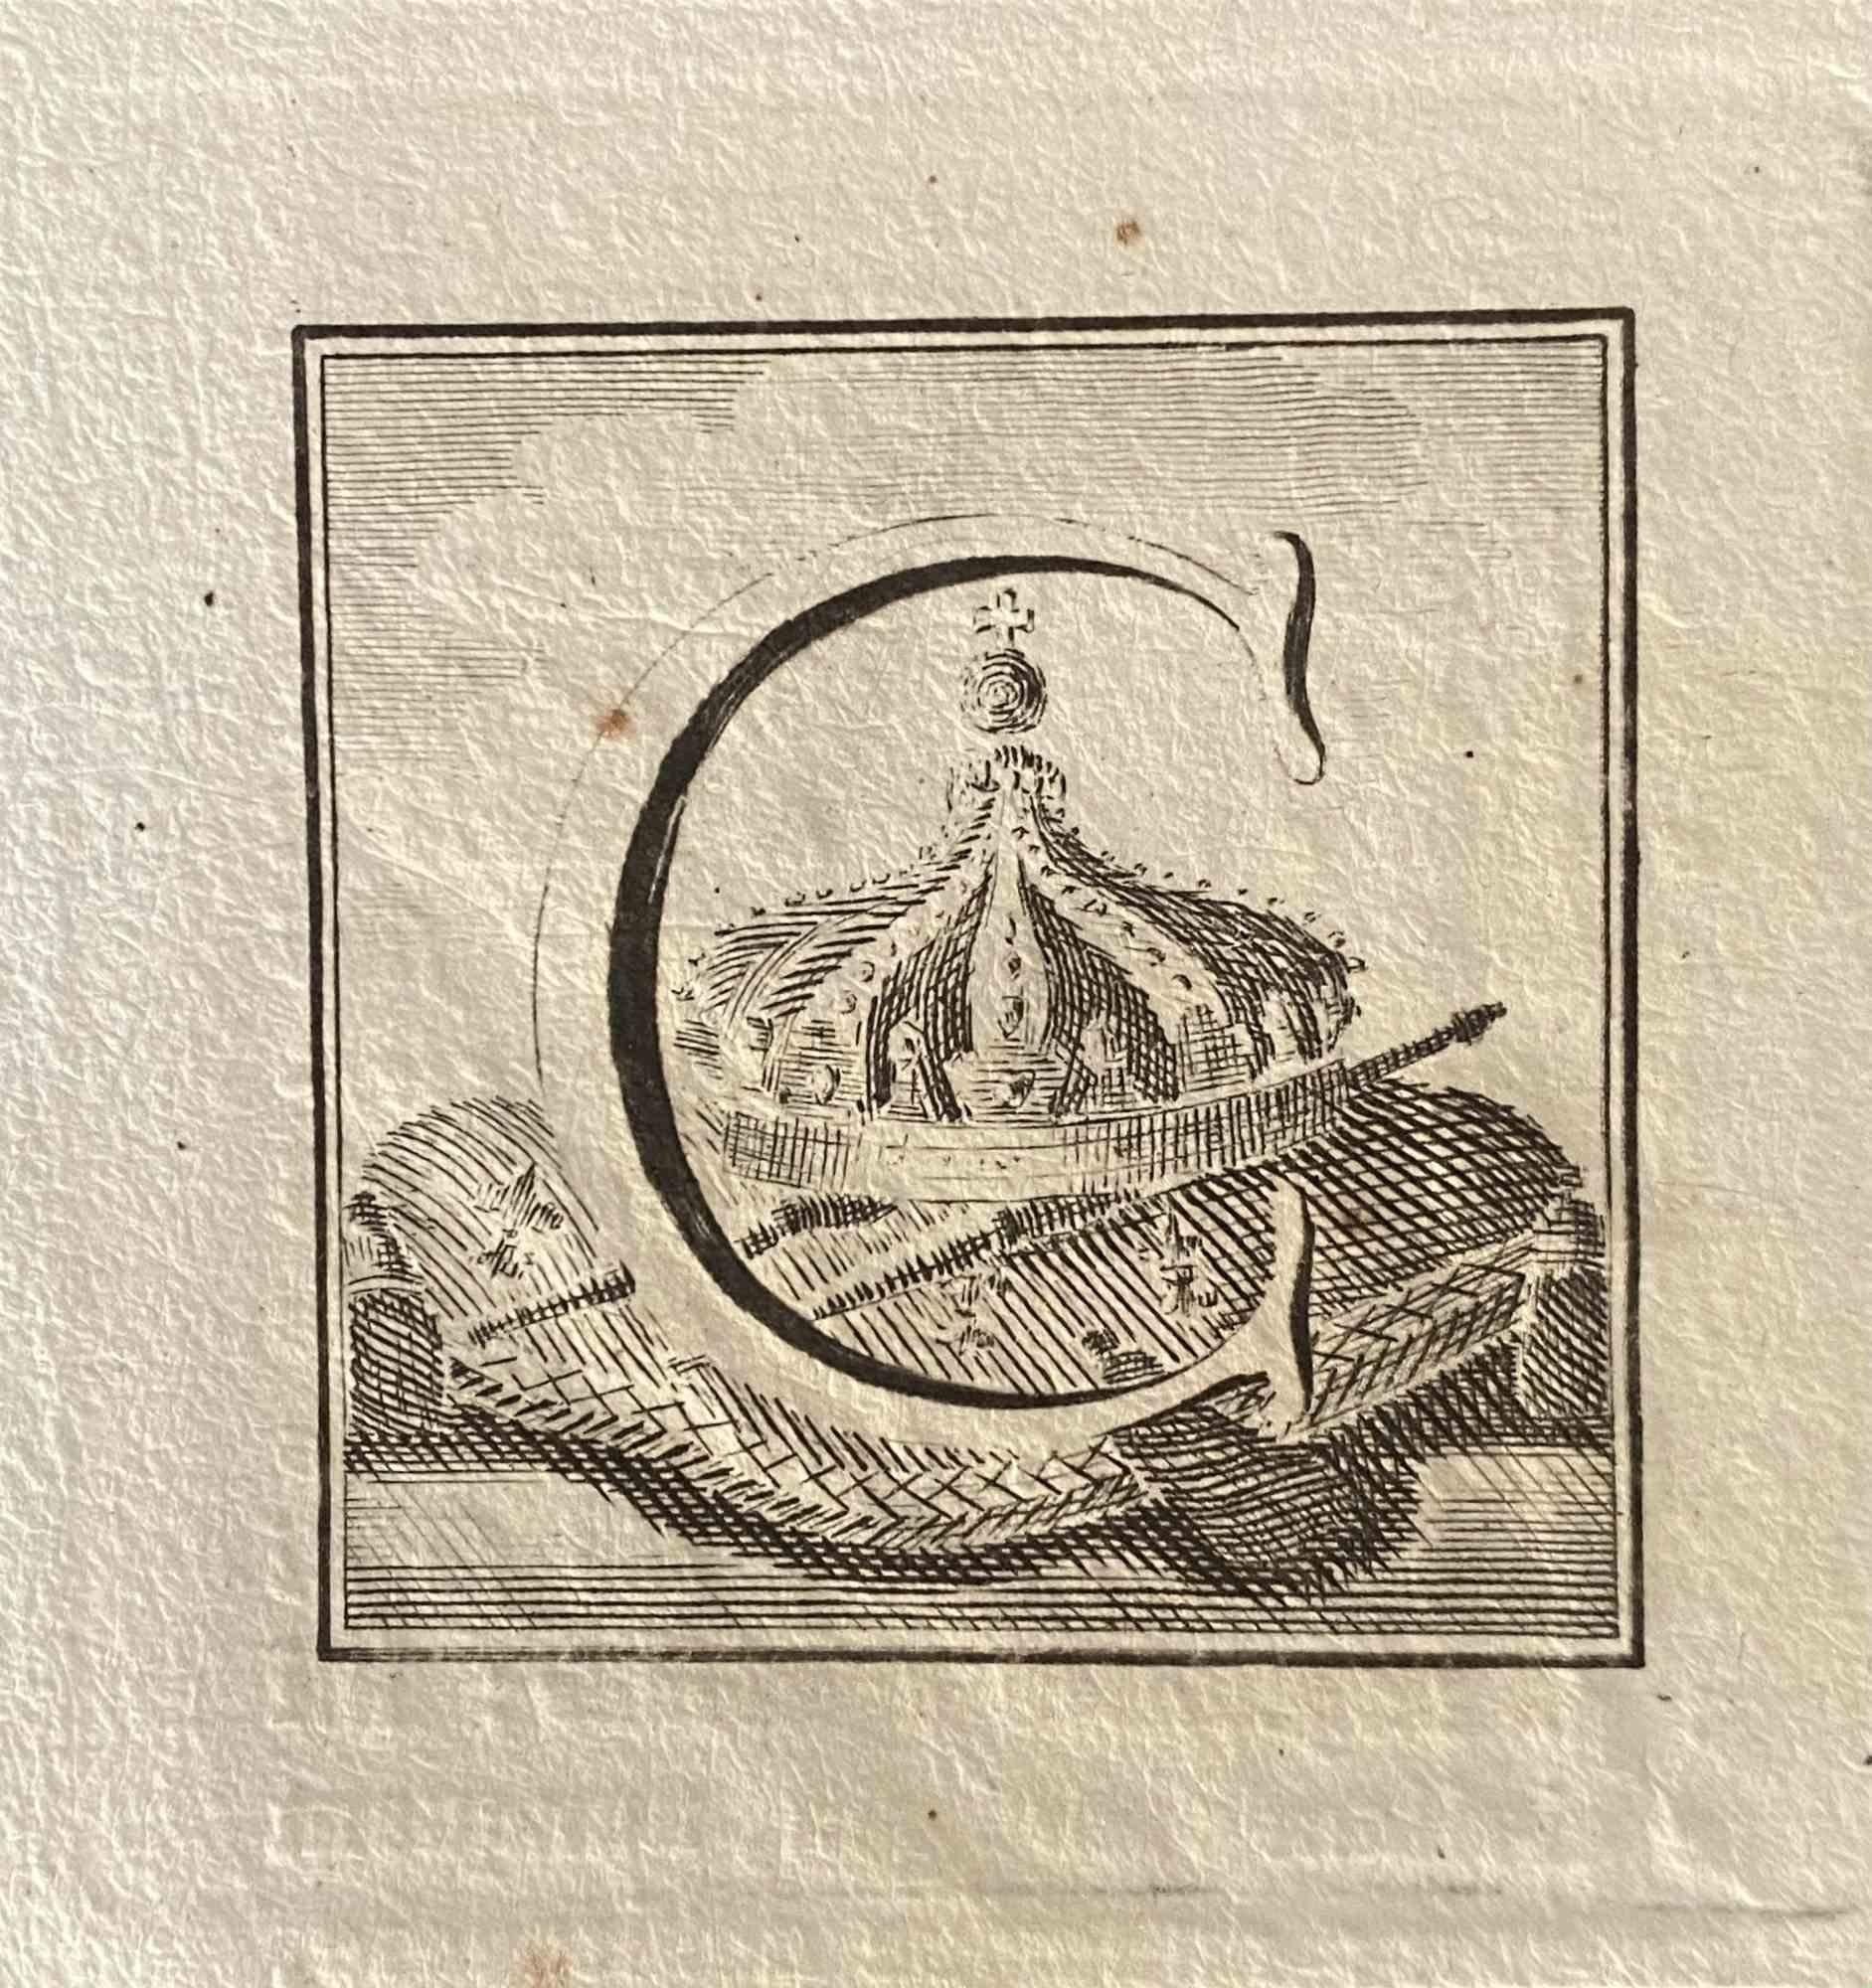 Capital letter for the Antiquities of Herculaneum Exposed, original etching from the end of the 18th century, made by Various Old Masters.

In very good condition, except for some stains along the margins.

In this work the letter that appears in